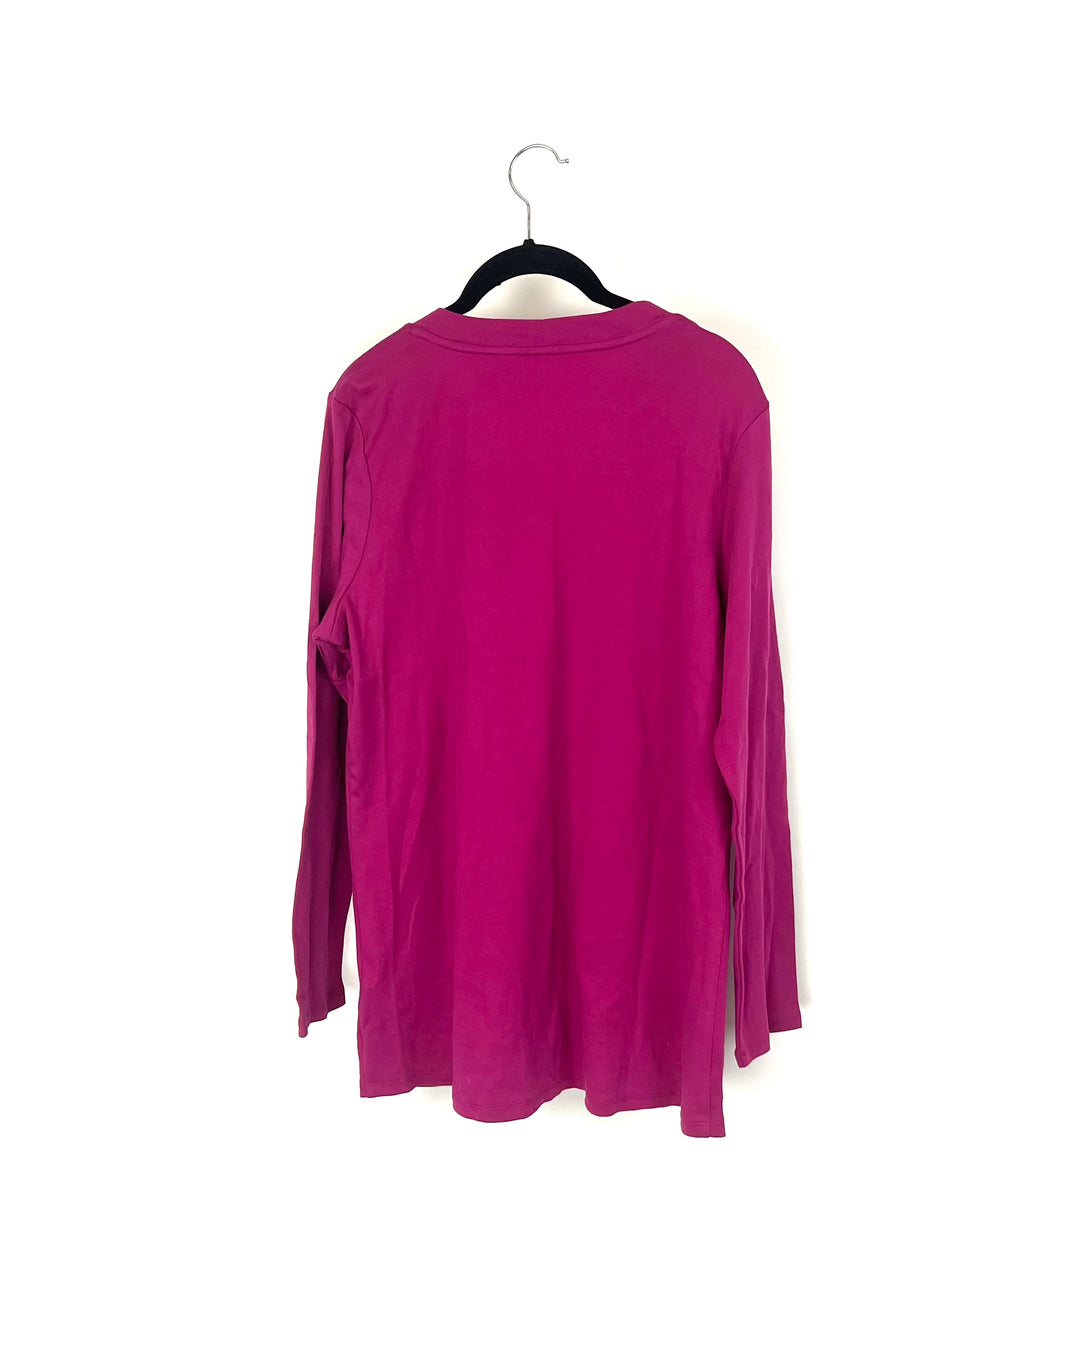 Pink Sweater - Size 6-8